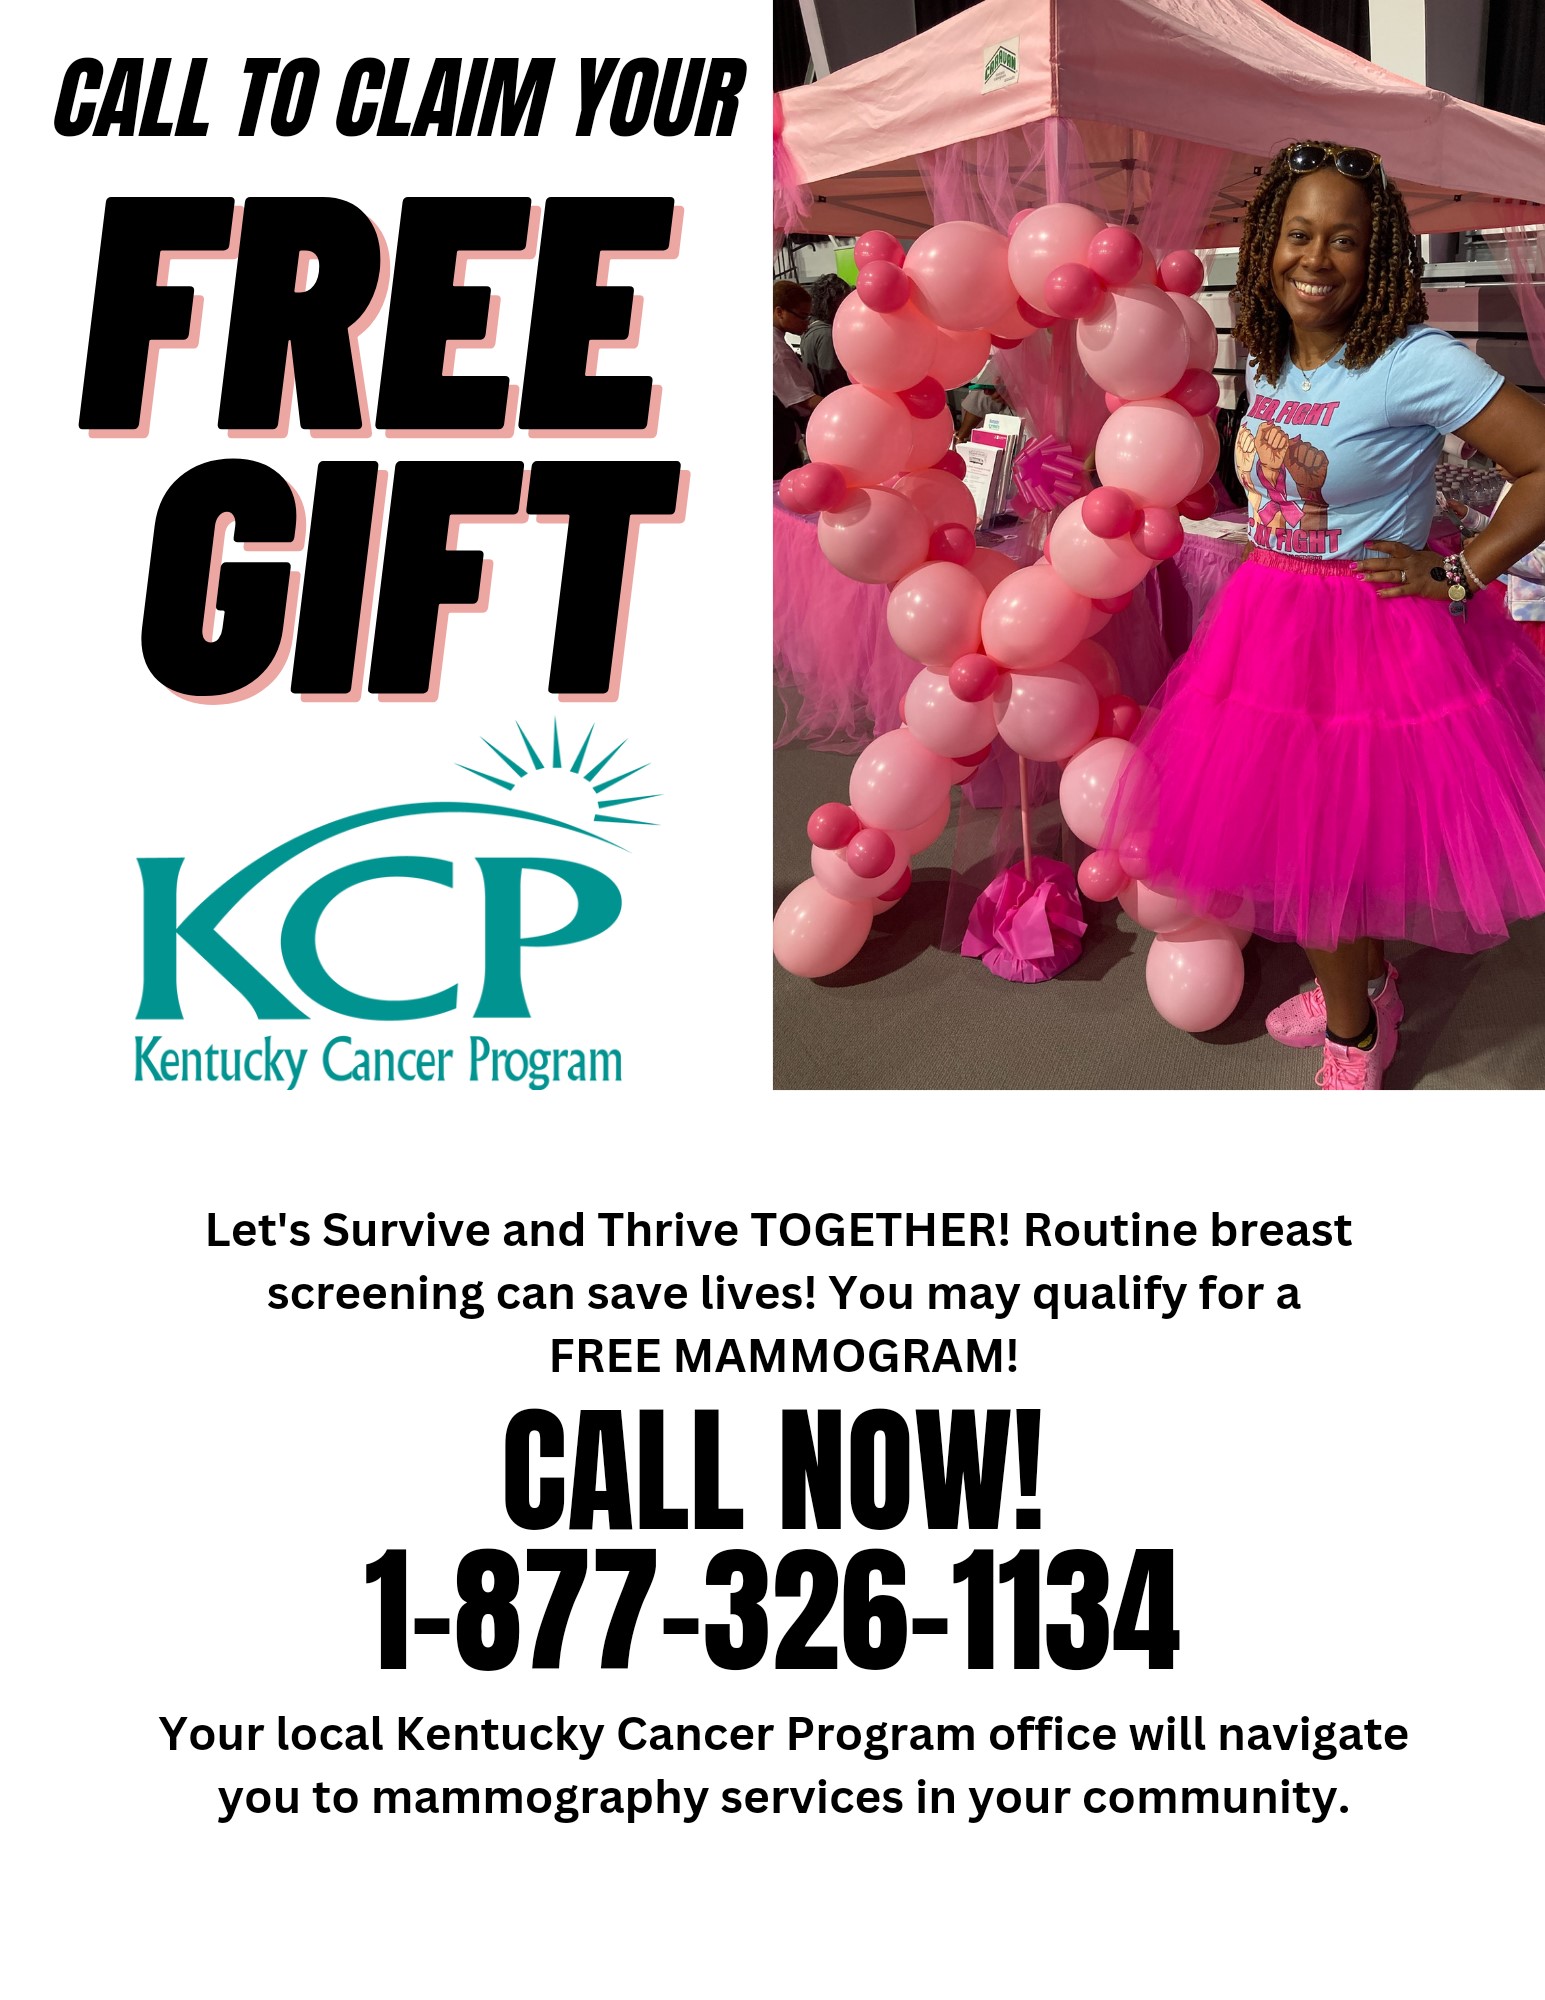 Flyer of campaign survive and thrive together. Receive a free gift by calling 1-877-326-1134 and you may qualify for a free mammogram.